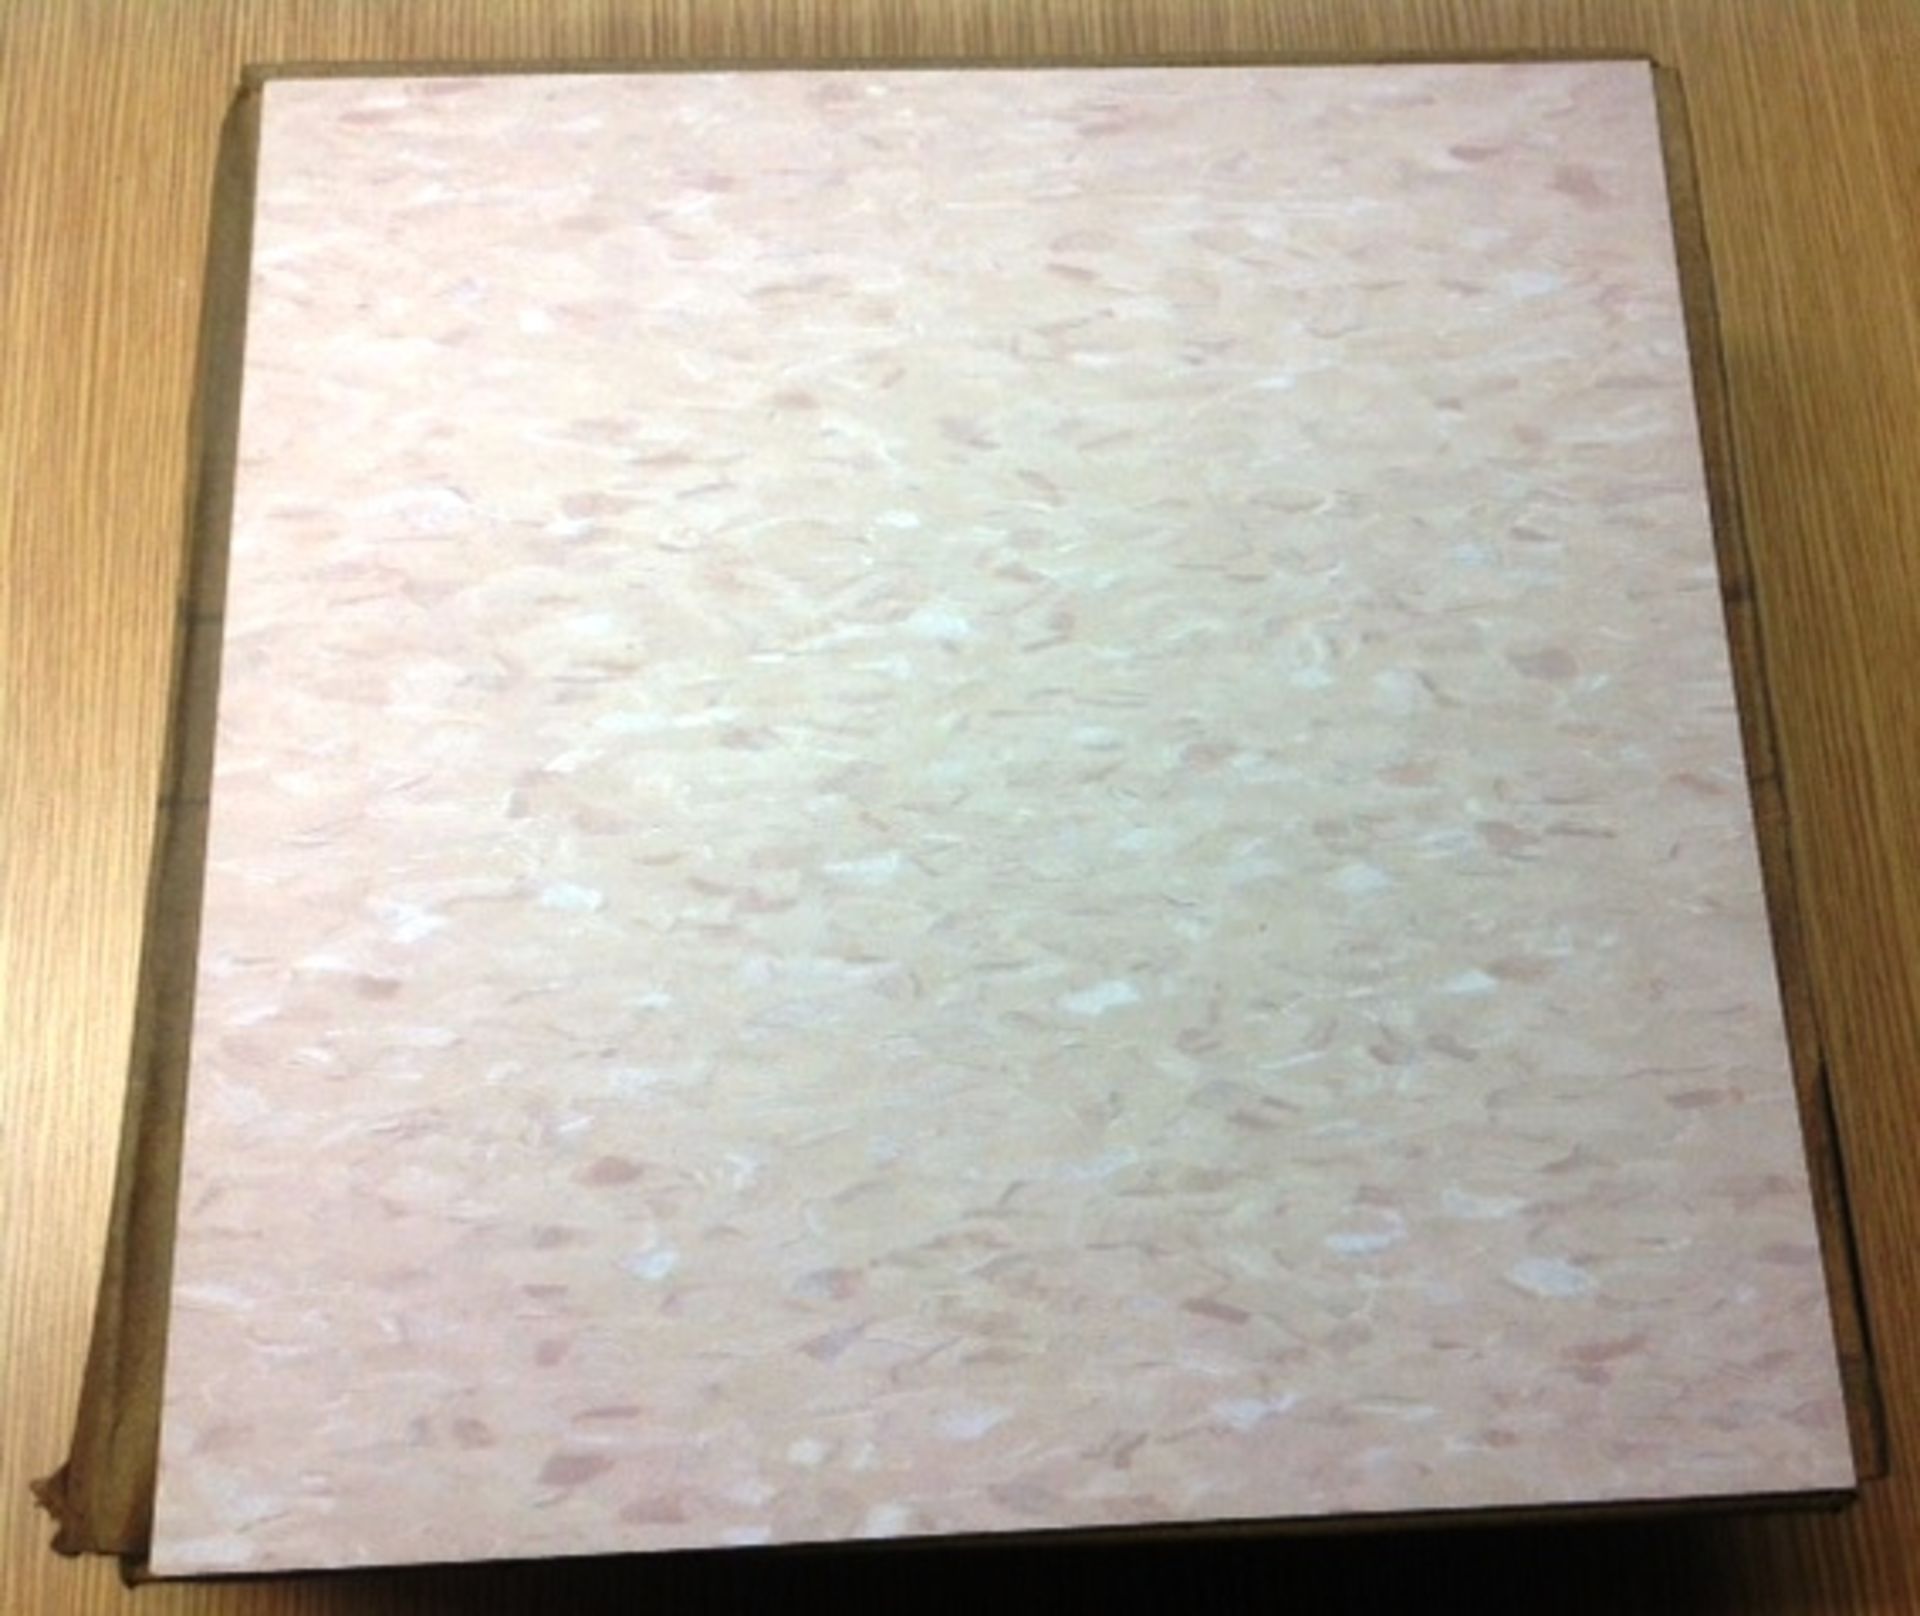 10 x Boxes of Armstrong vinyl floor tiles - 45 tiles per box = 45 sq ft - Image 4 of 4